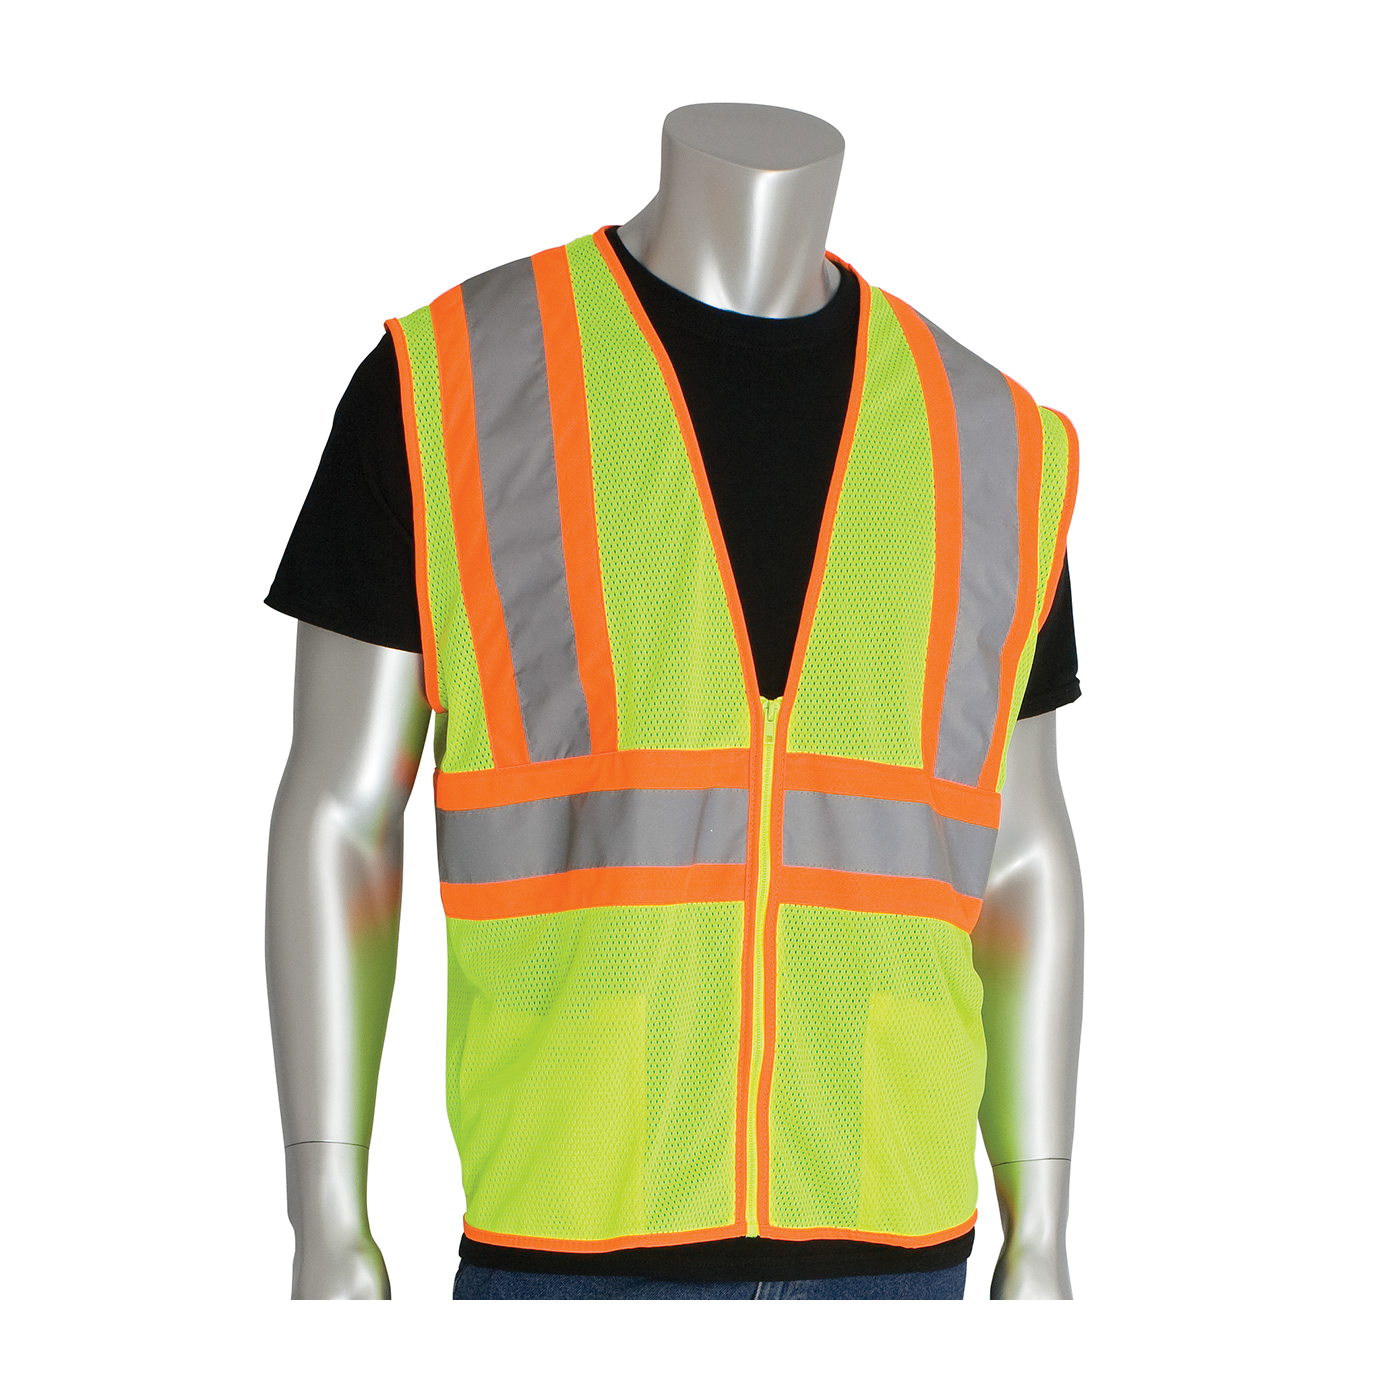 PIP® 302-MVLY-5X 2-Tone Safety Vest, 5XL, Hi-Viz Lime Yellow, Polyester Mesh, Zipper Closure, 2 Pockets, ANSI Class: Class 2, Specifications Met: ANSI 107 Type R